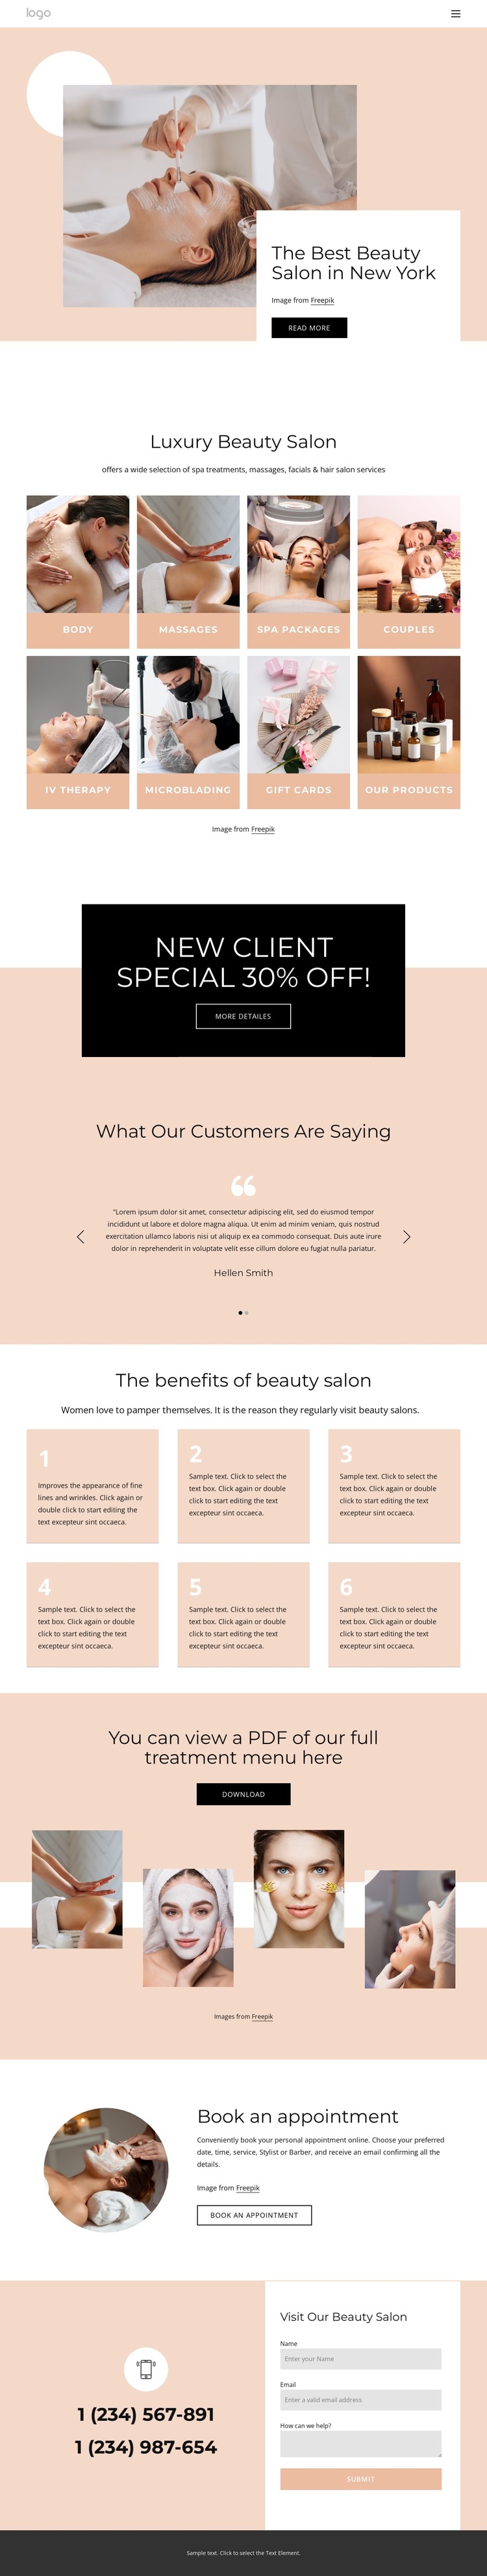 The best beauty salon in NYC HTML5 Template